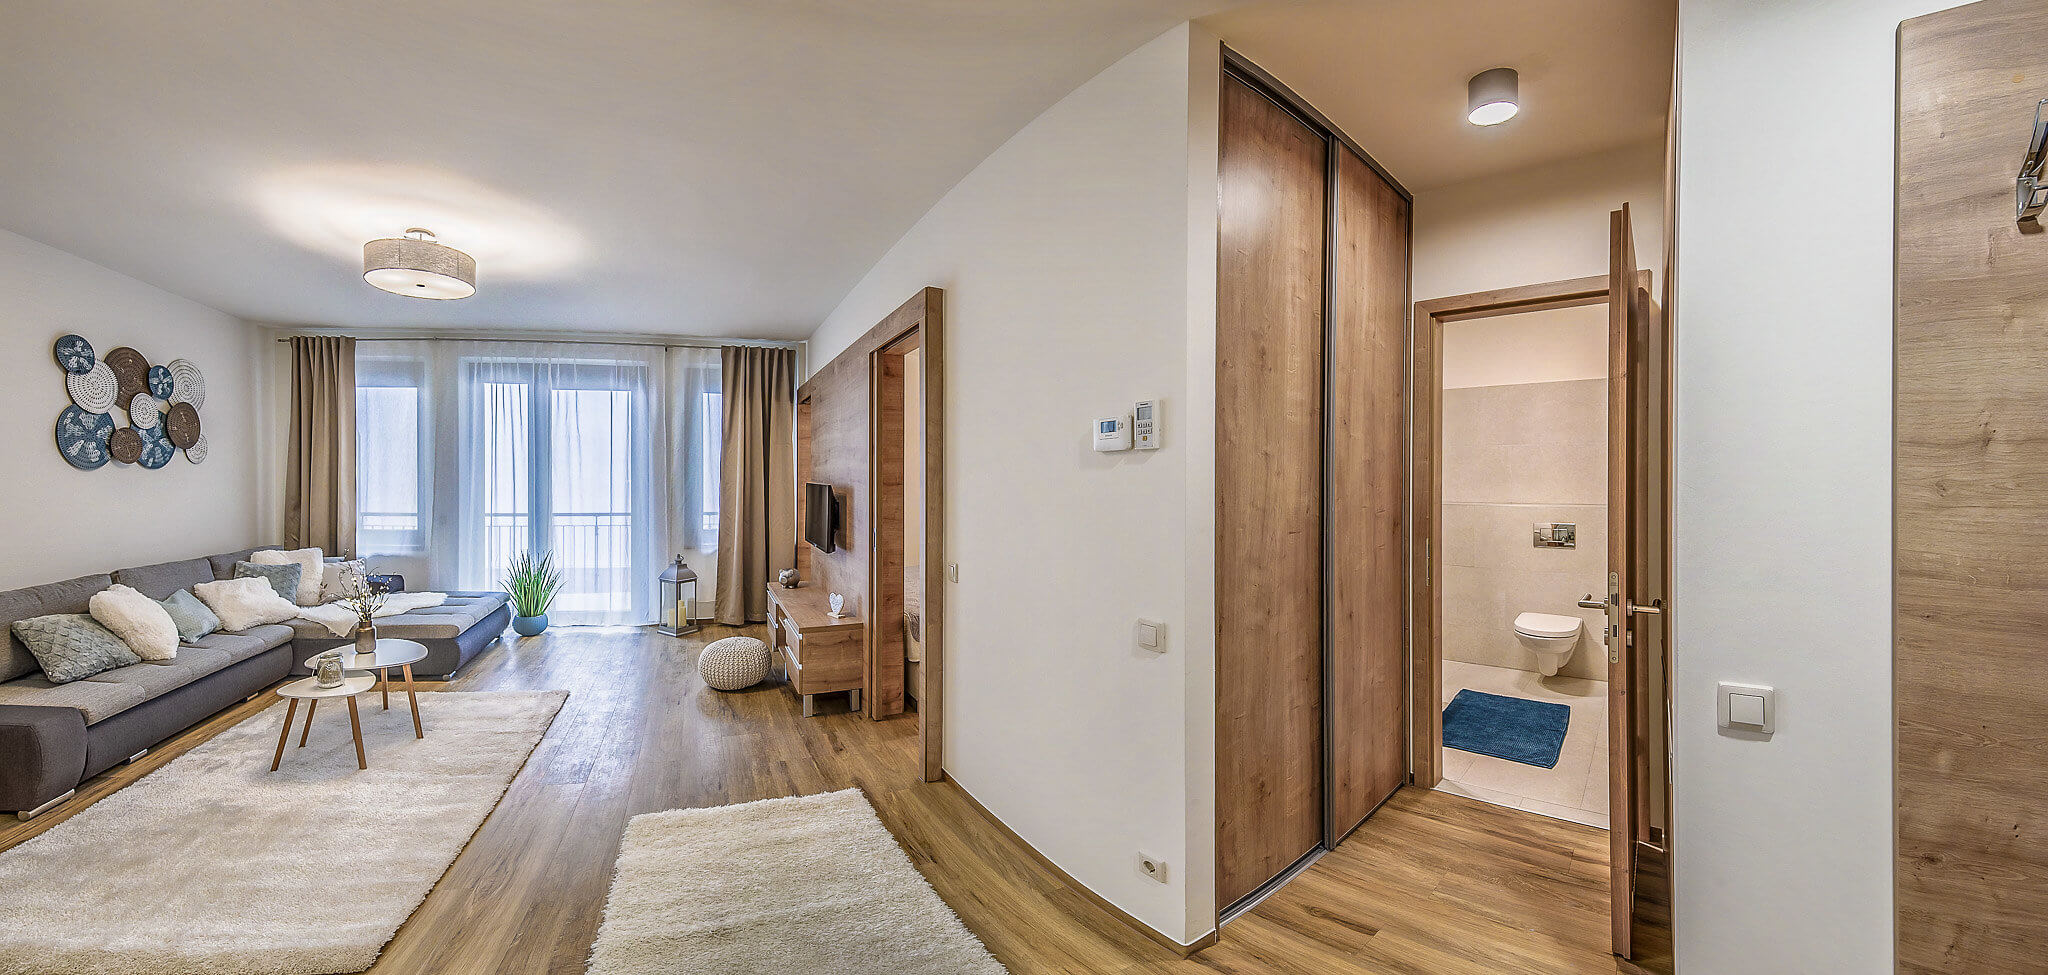 One bedroom lux 6 - Art Homes Budapest